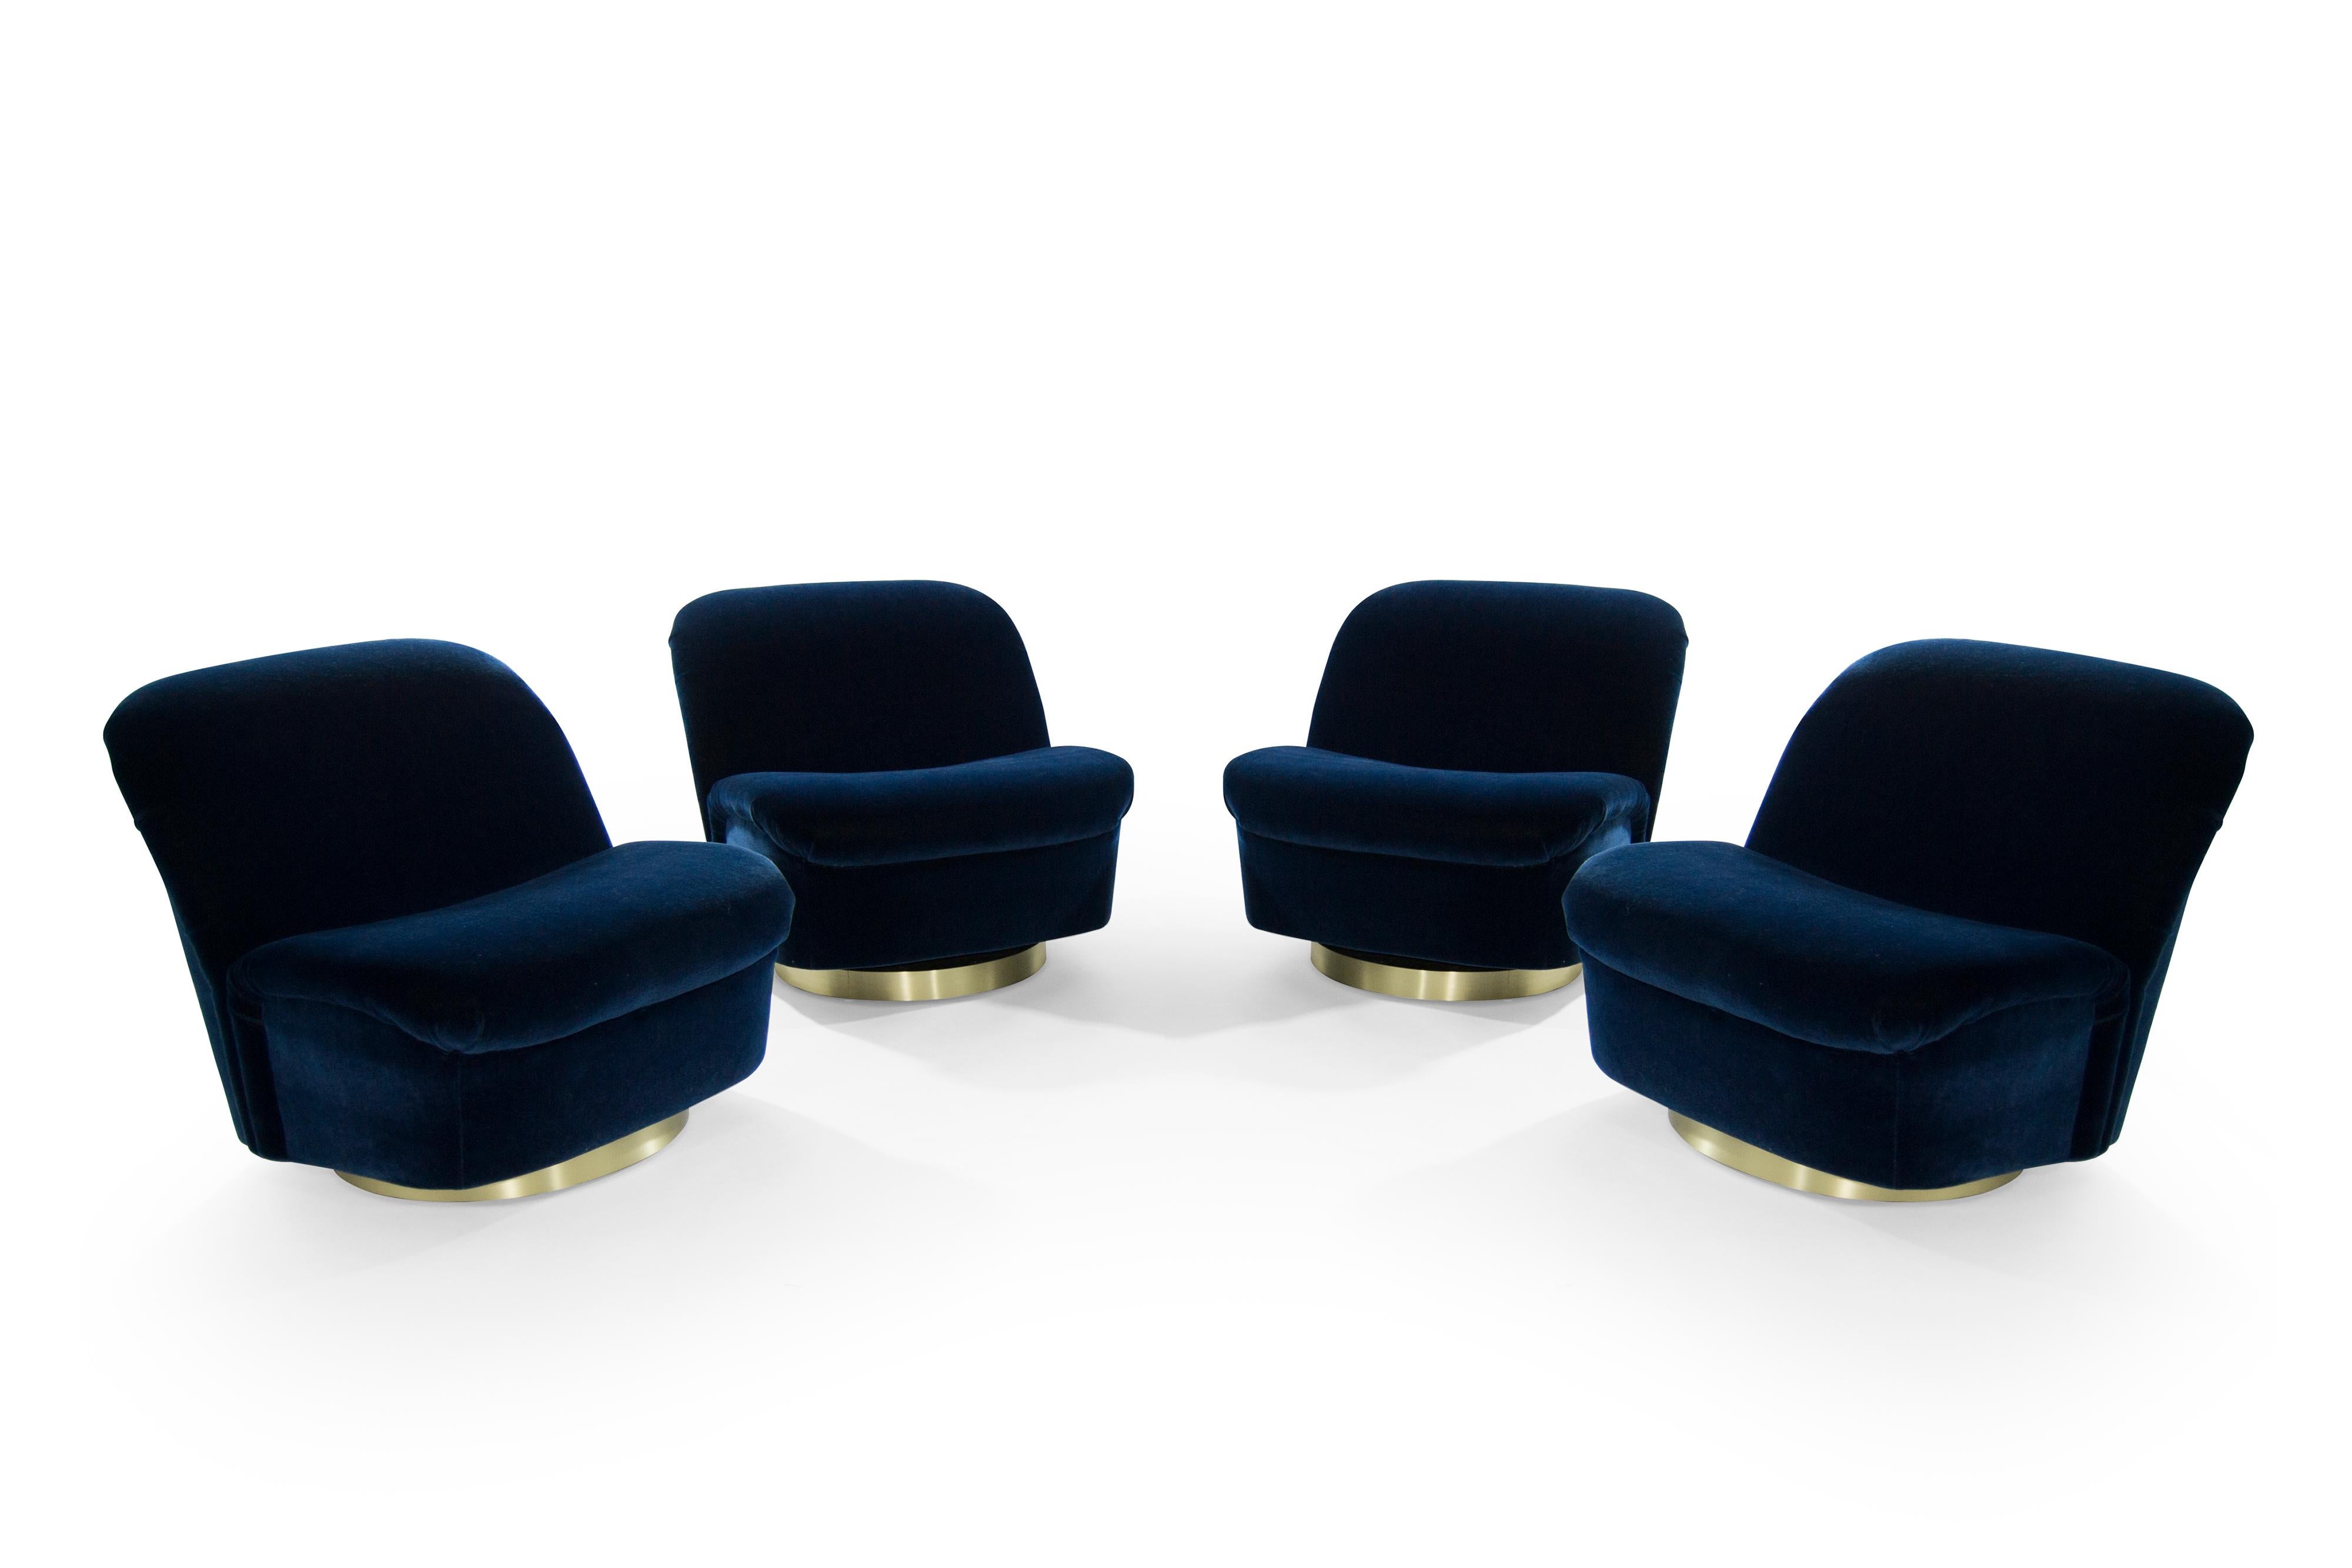 Set of four large scale swivel tilt lounge chairs by Directional. Newly upholstered in navy blue mohair, bases newly fitted with brushed brass in satin finish. Design attributed to Vladimir Kagan. Priced as a set of four. Extremely comfortable.